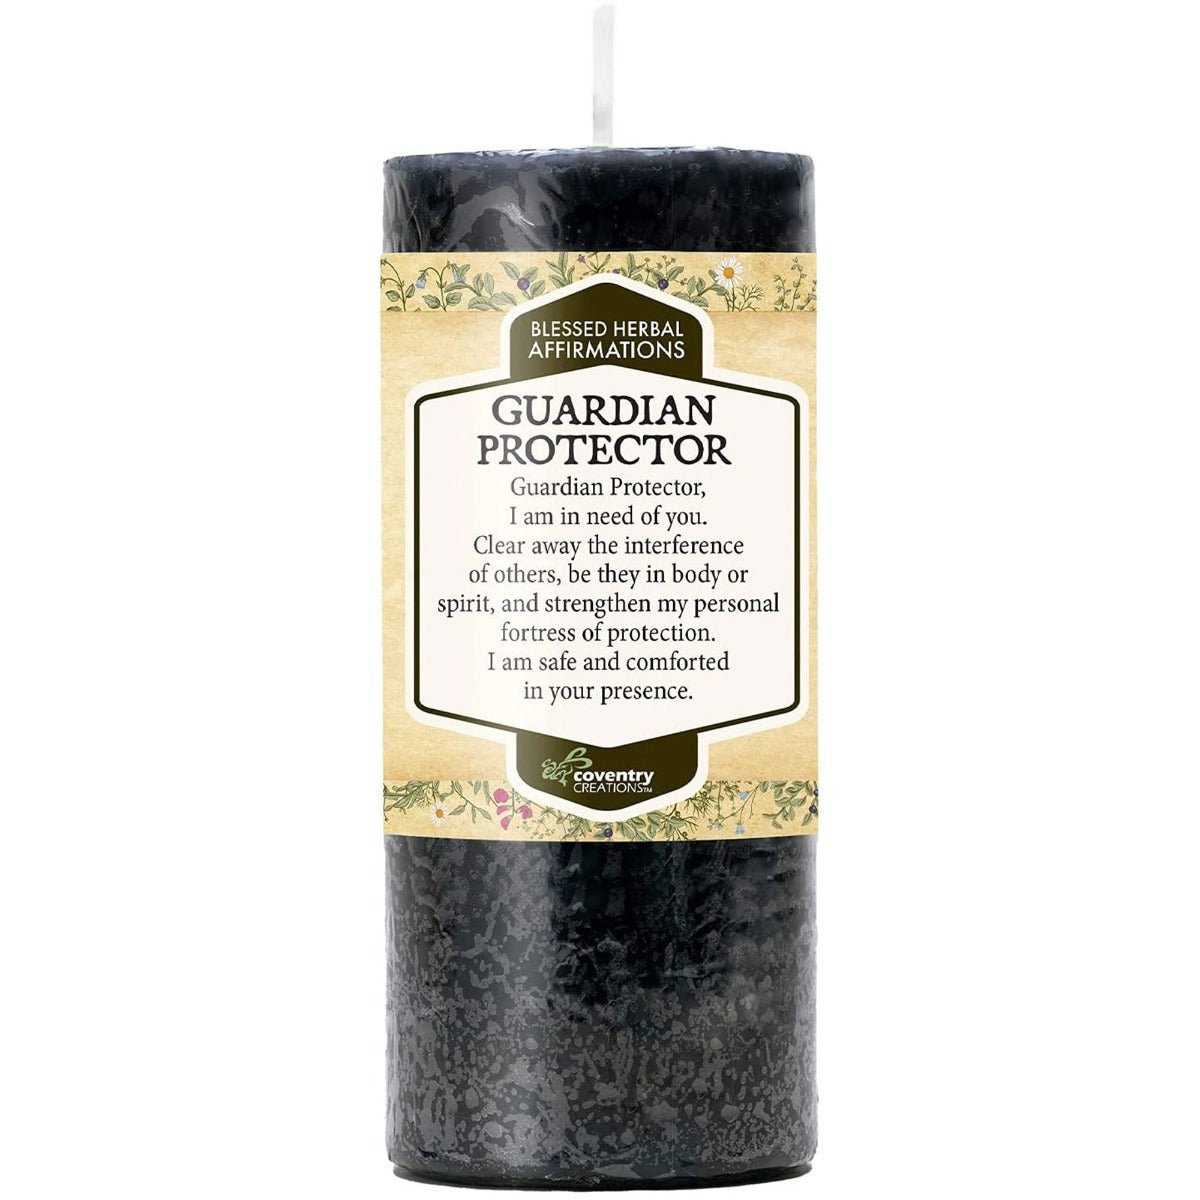 Guardian Protector Affirmation Candle - 13 Moons